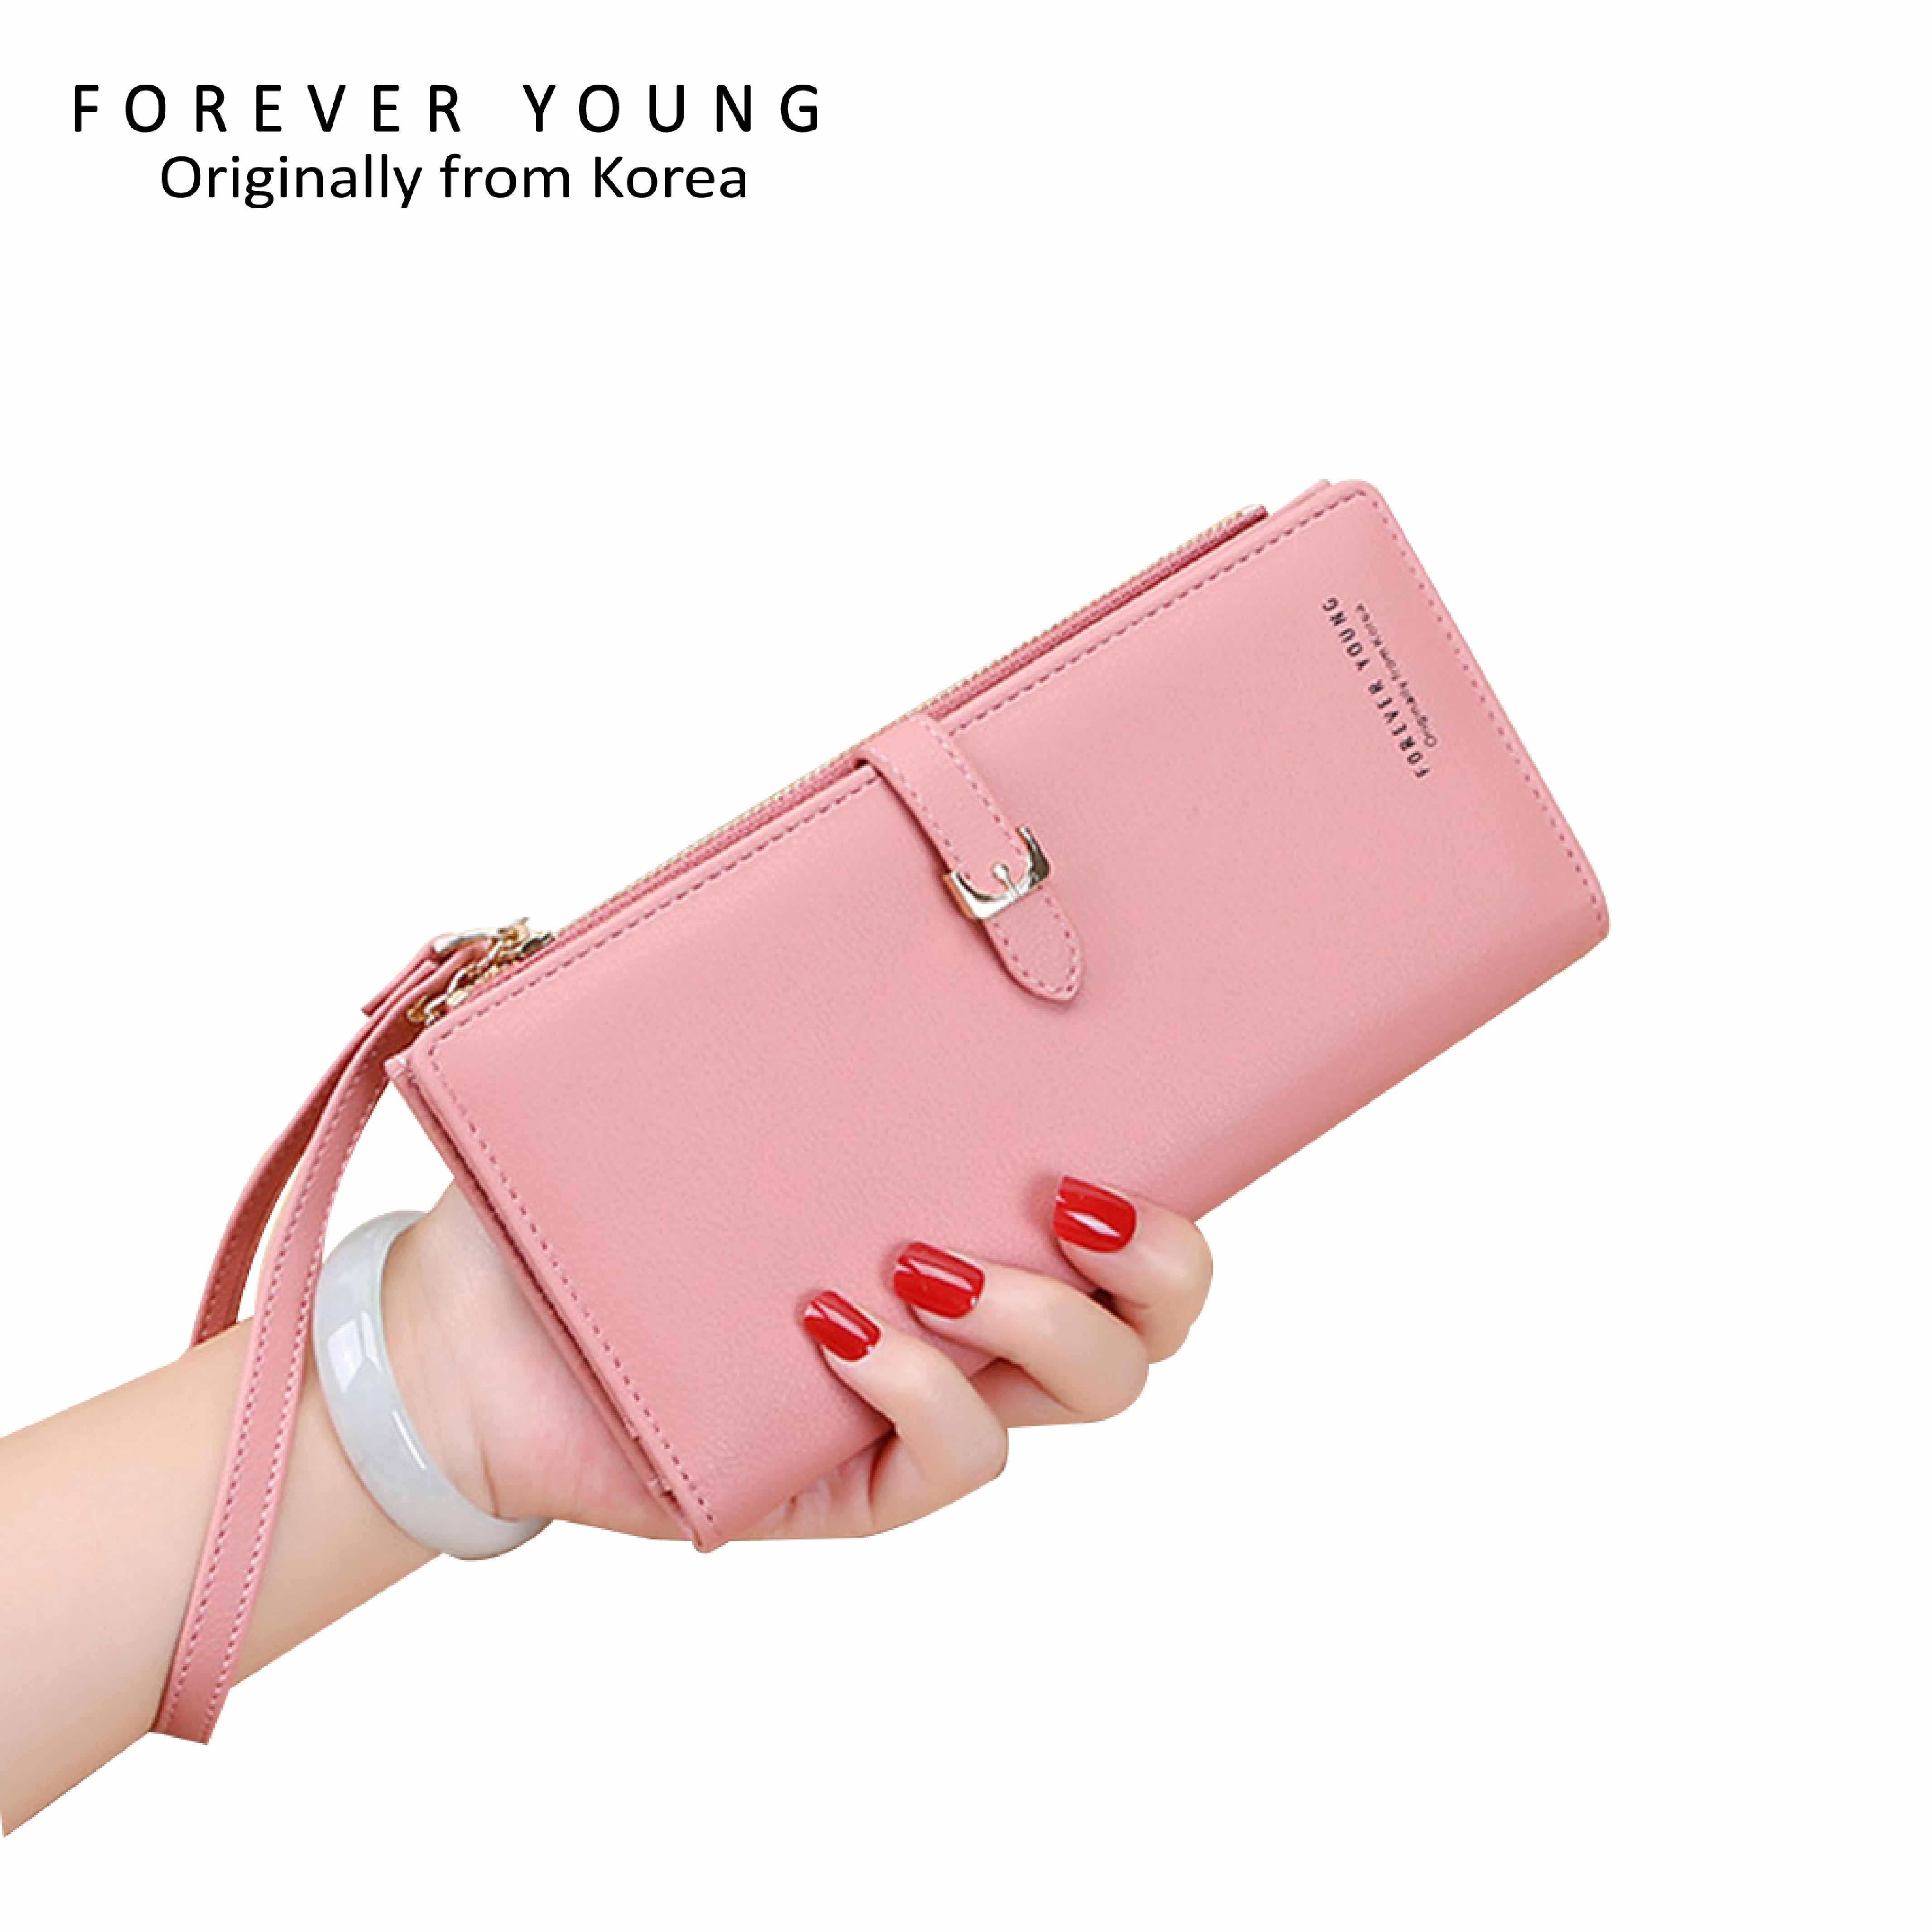 New Forever Young Pu Leather Purse For Women